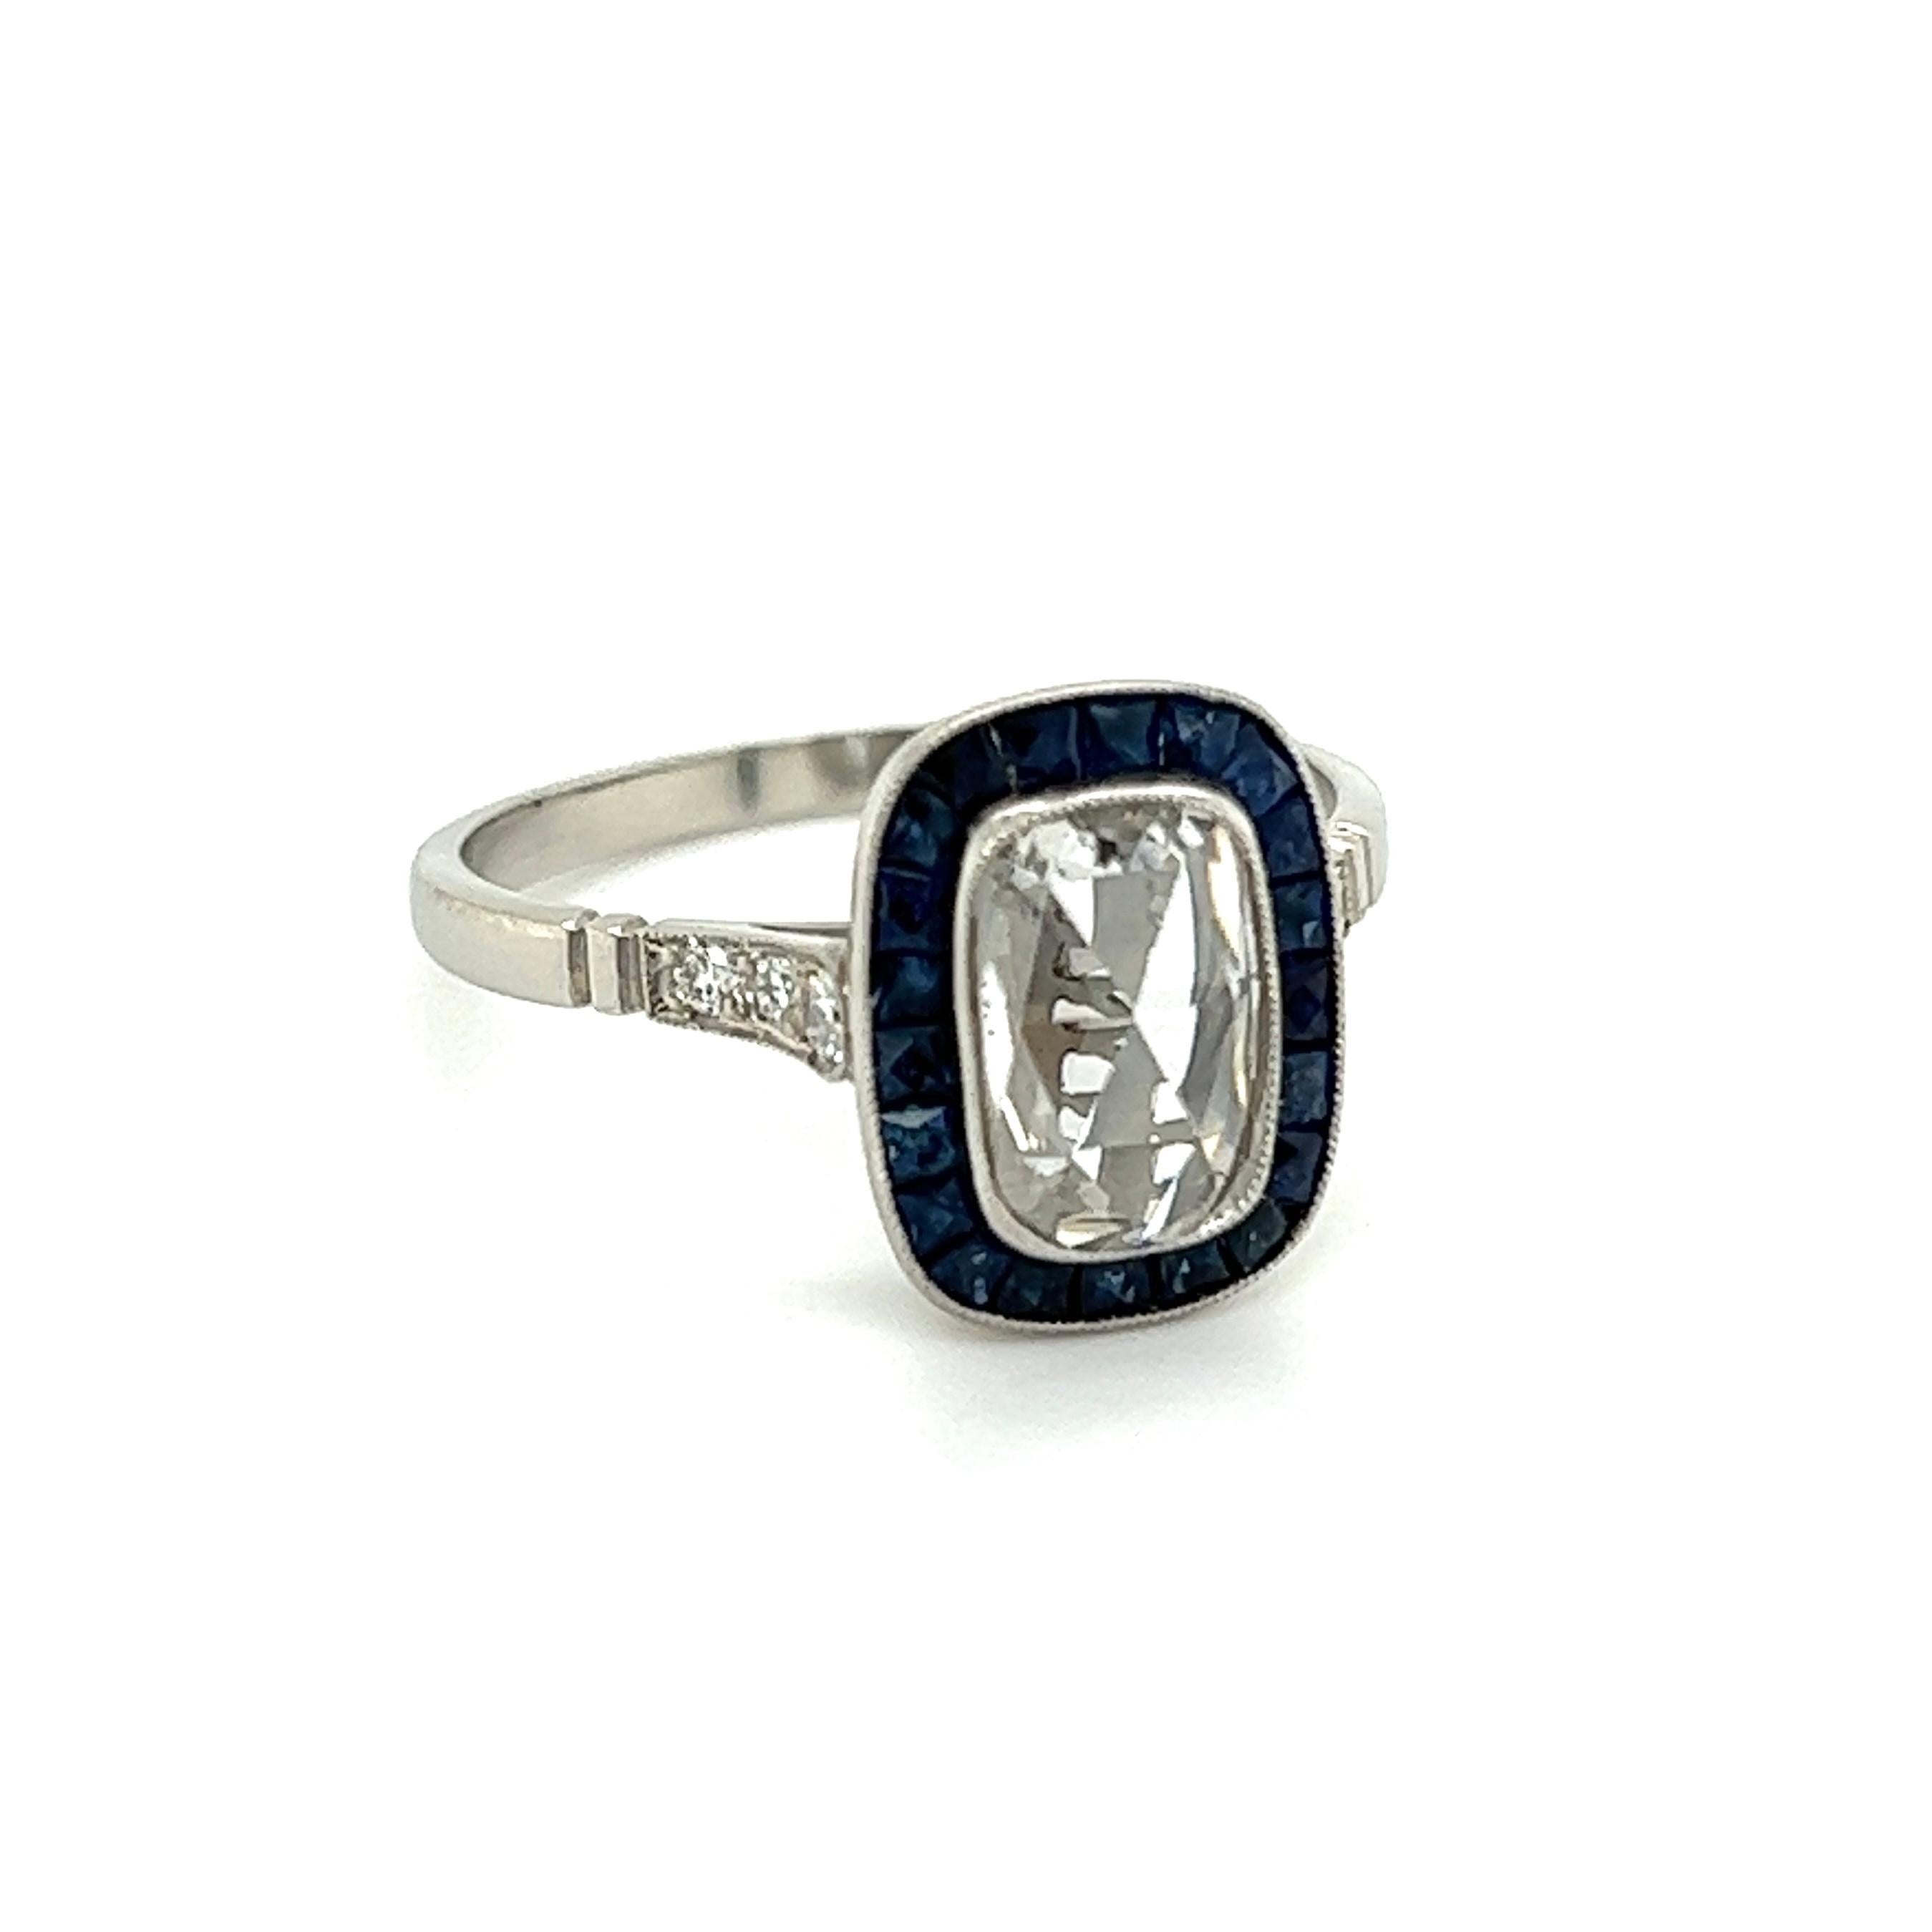 Simply Beautiful! Finely detailed Art Deco Revival Diamond and Sapphire Cocktail Ring. Centering a securely nestled Hand set 0.70 Carat 8mm Rose Cut Diamond, surrounded by Sapphires, approx. 1.00tcw and 6 Diamonds, approx. 0.10tcw on shank. Approx.